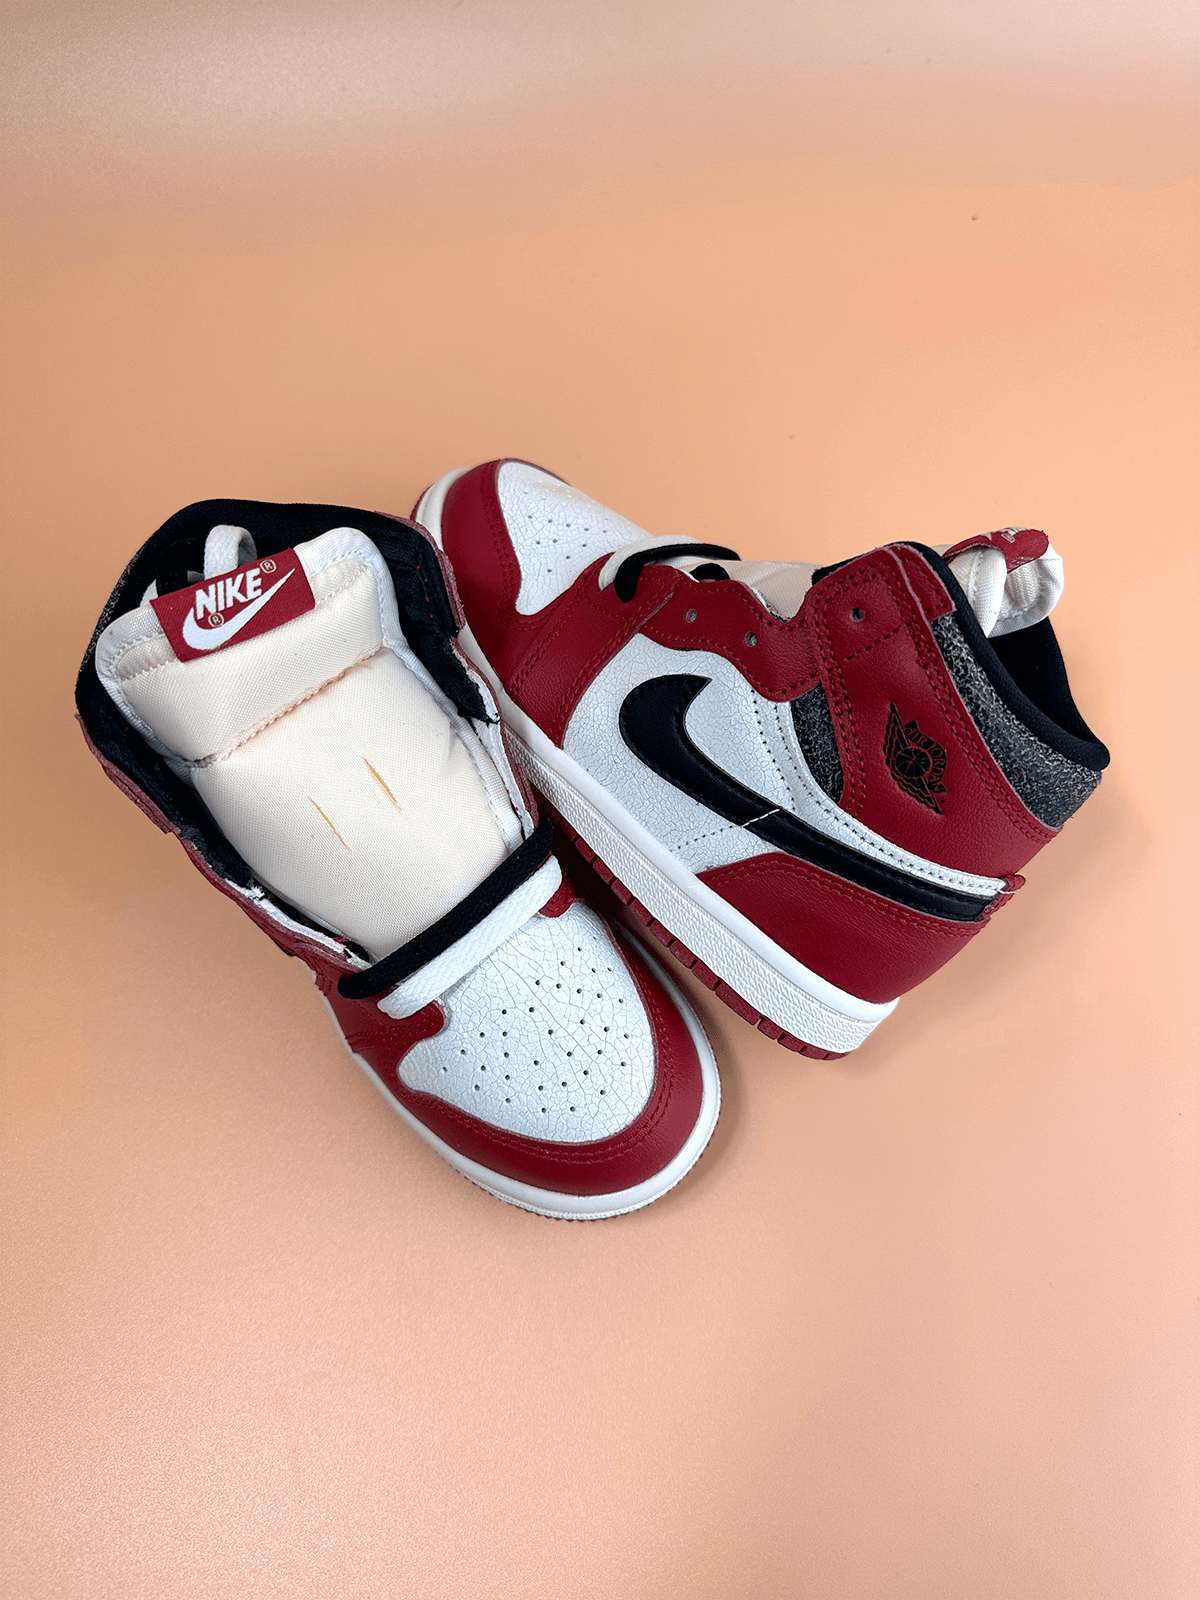 Jordan 1 Retro High Chicago Lost and Found Toddler